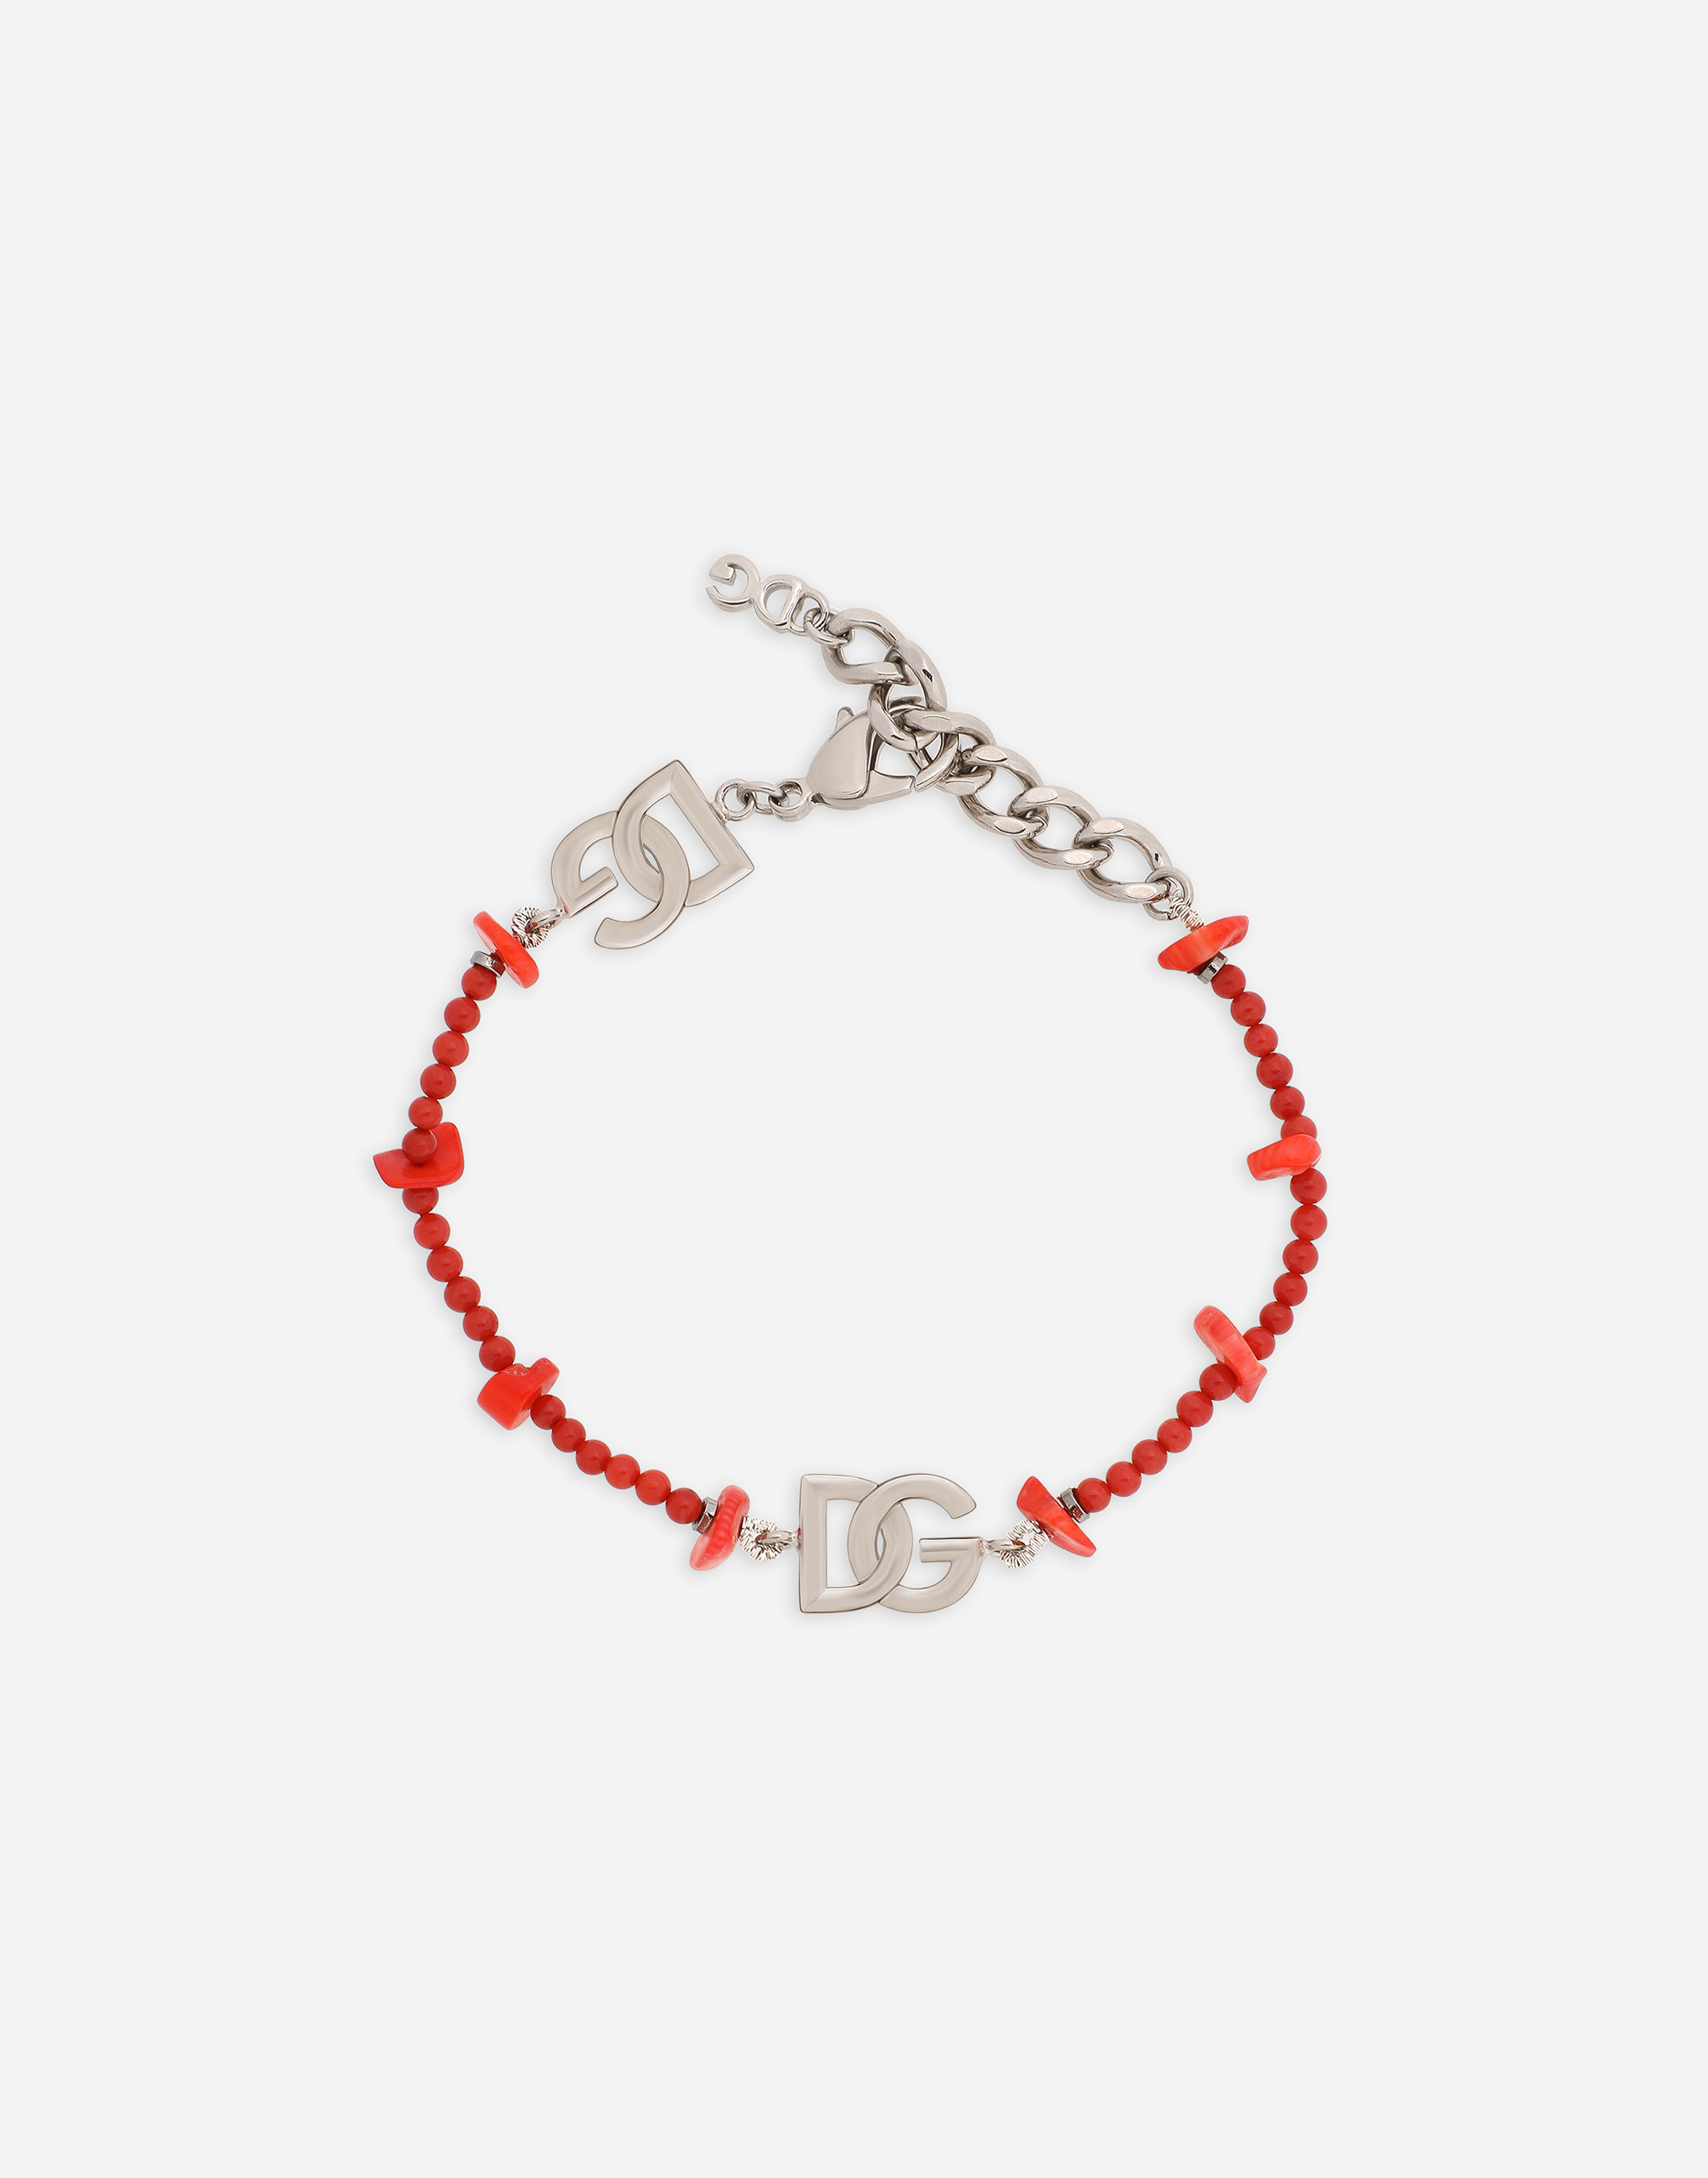 Bracelet with resin coral and DG logo embellishment in Silver